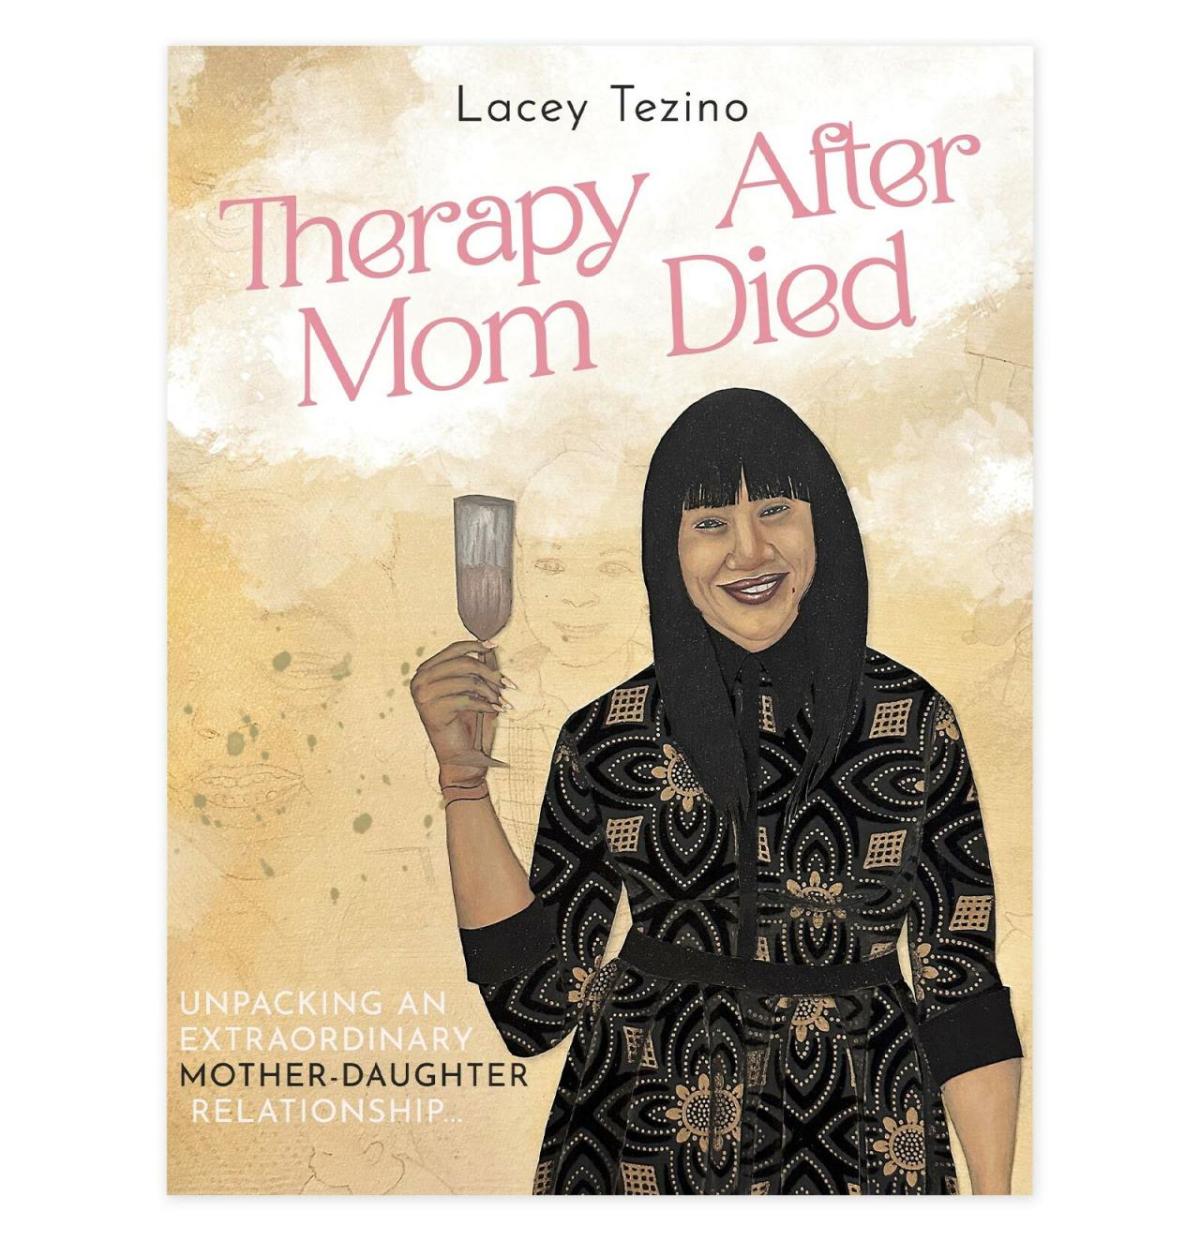 Book cover "Therapy after mom died" by Lacey Tezino